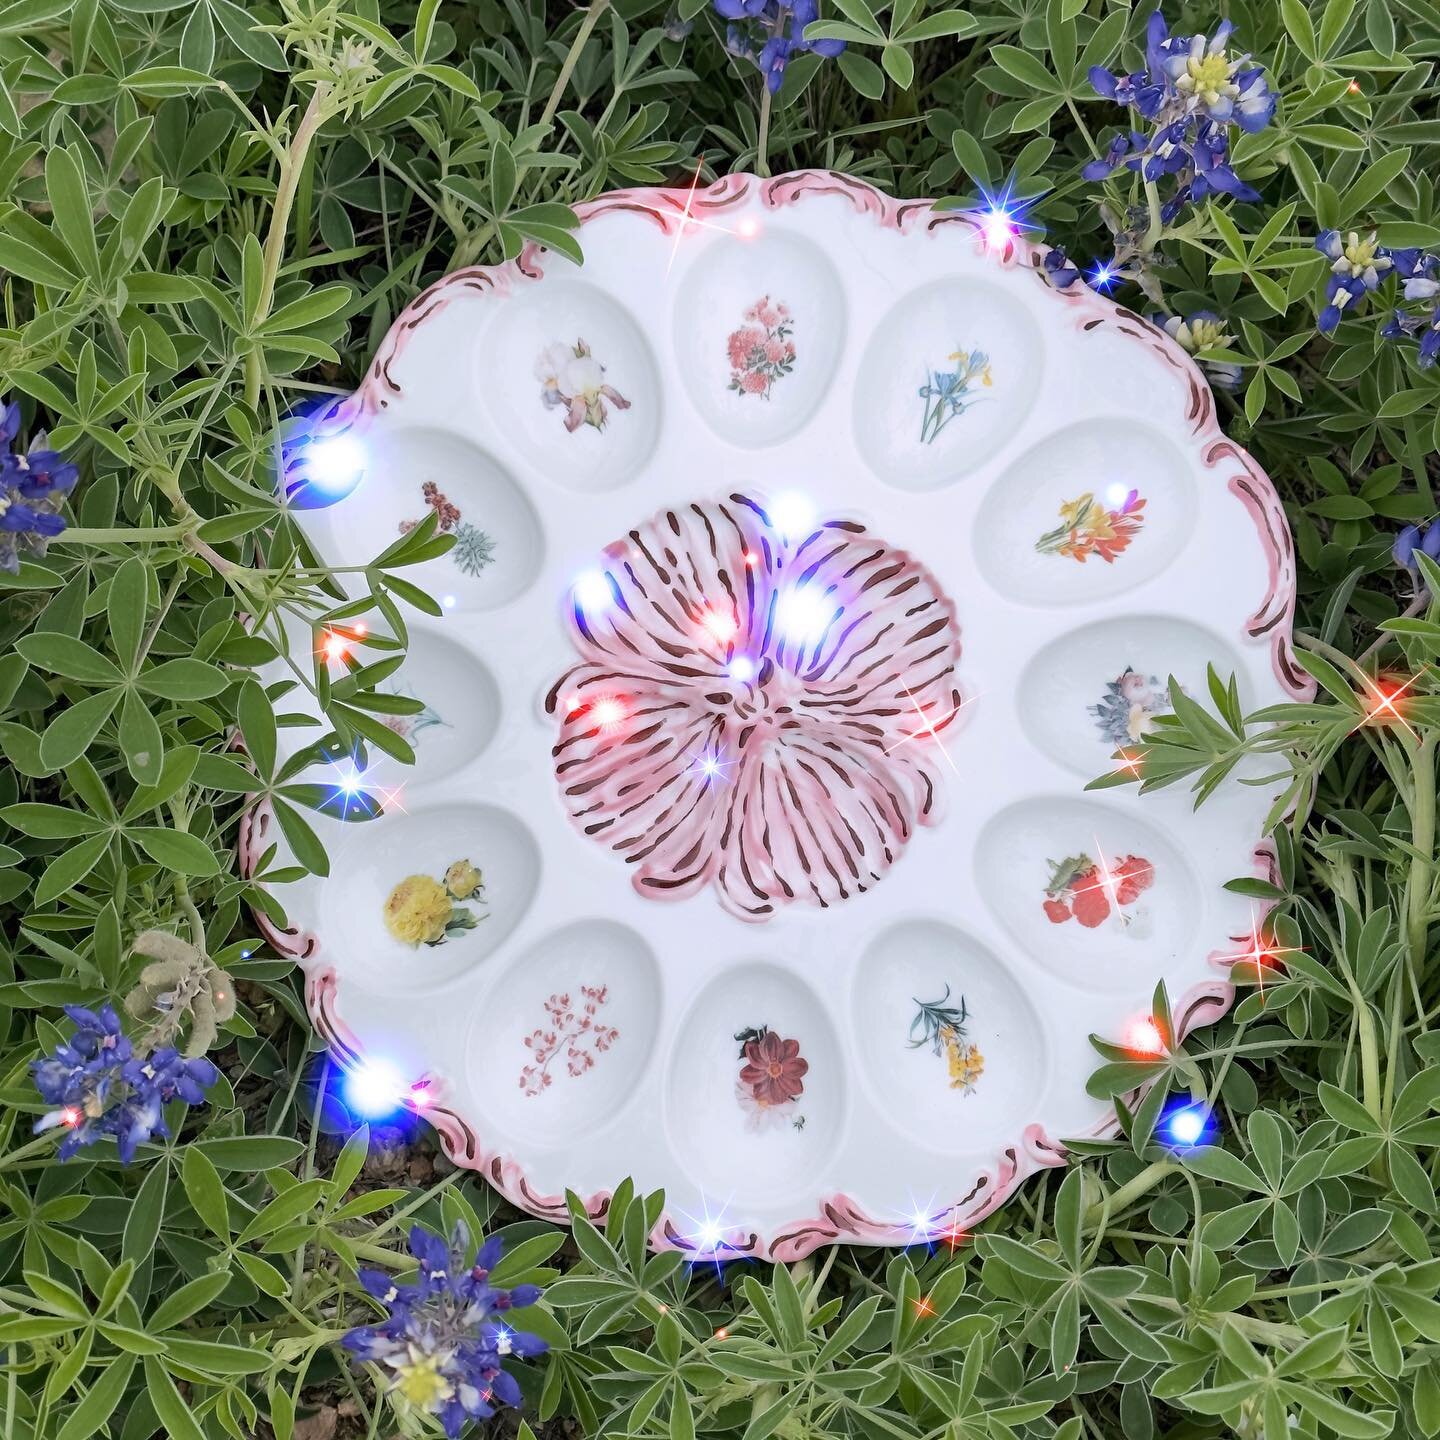 Spring in the Texas Hill County. The peace of living in the country side on iconic Devil&rsquo;s Backbone see webite in bio. #ranchomirando  #bridalregistry  #tablescape  #tablescapes  #handmade #tableware  #tabledecor